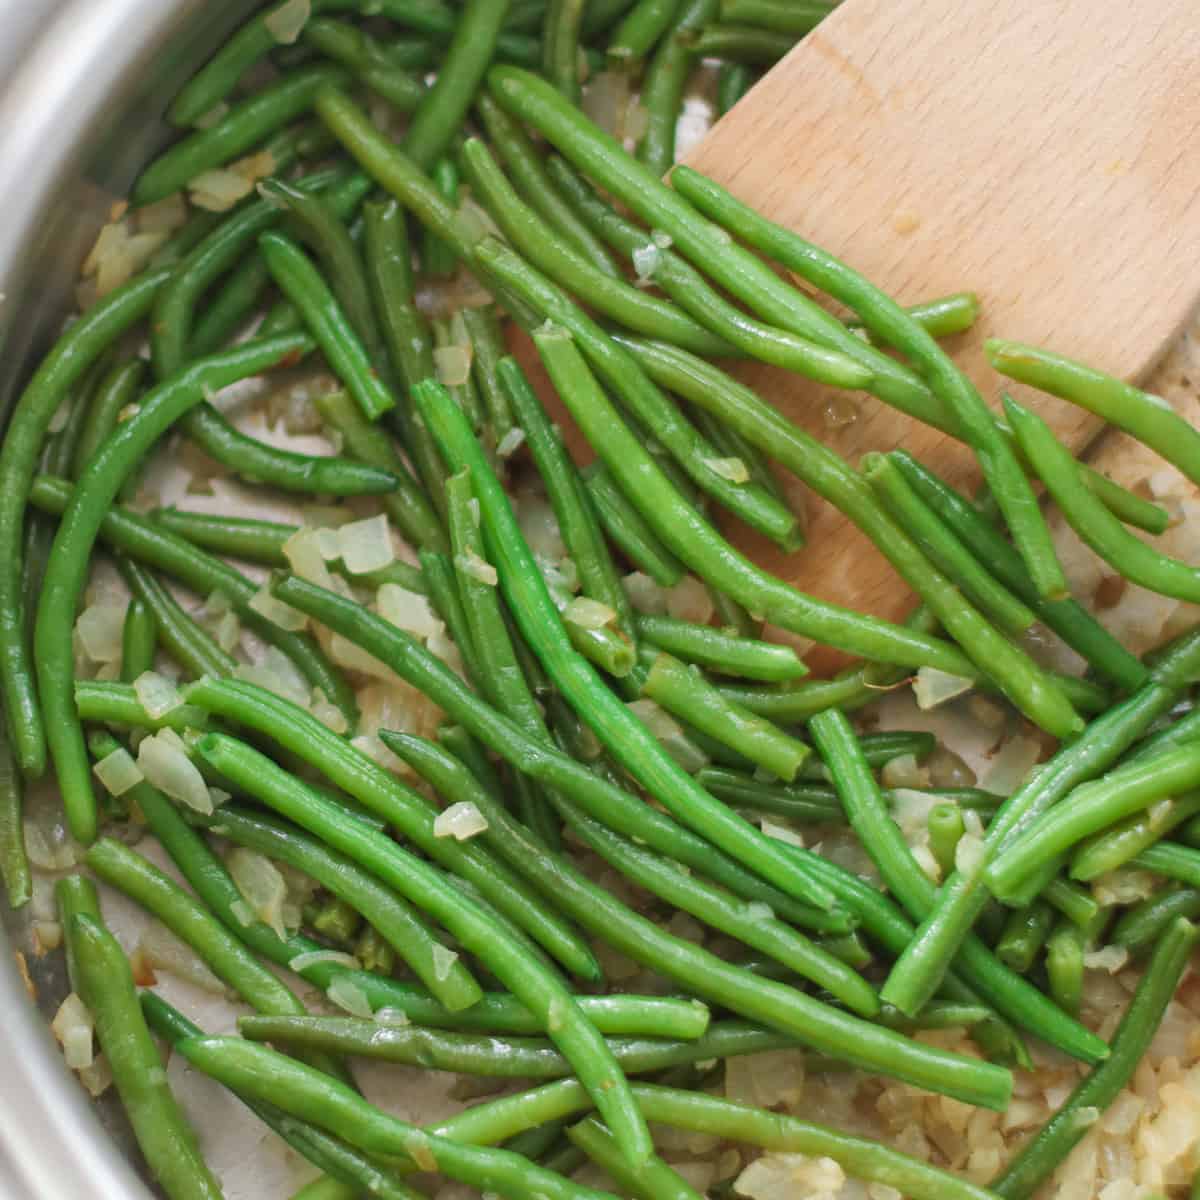 https://www.mjandhungryman.com/wp-content/uploads/2022/11/How-to-cook-frozen-green-beans.jpg